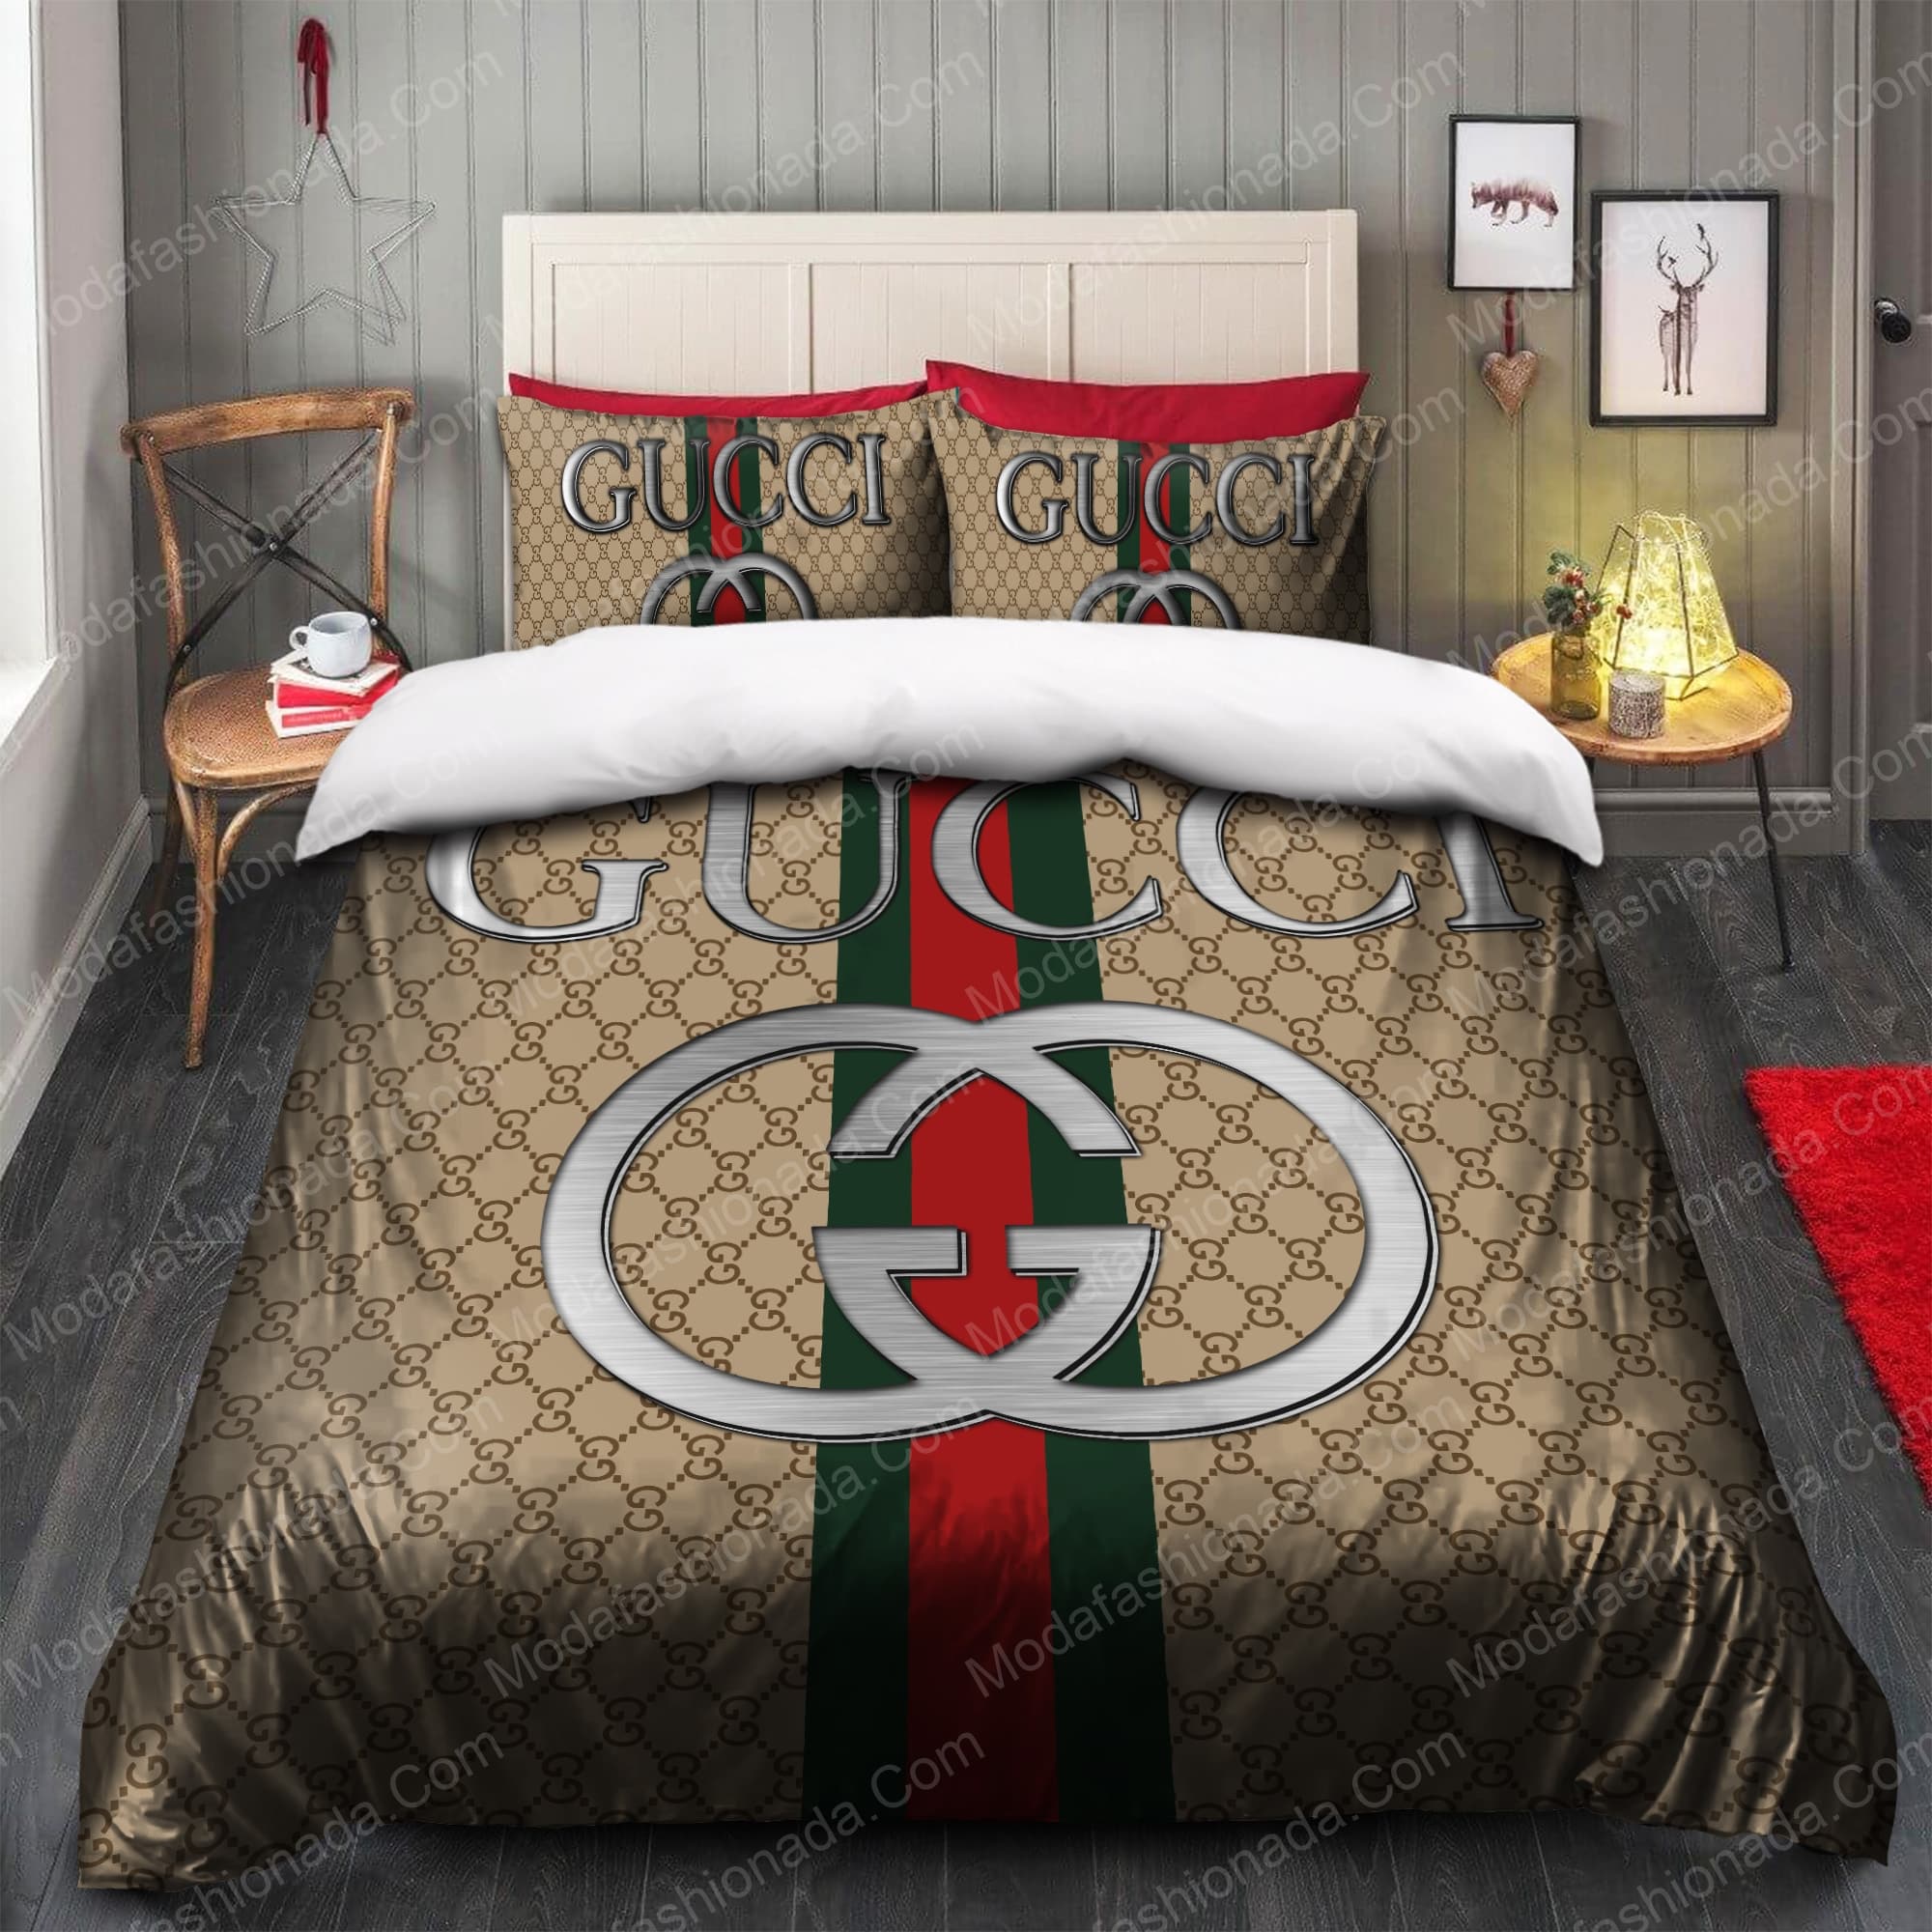 Buy Gucci Bedding Sets Bed Sets With Twin, Full, Queen, King Size